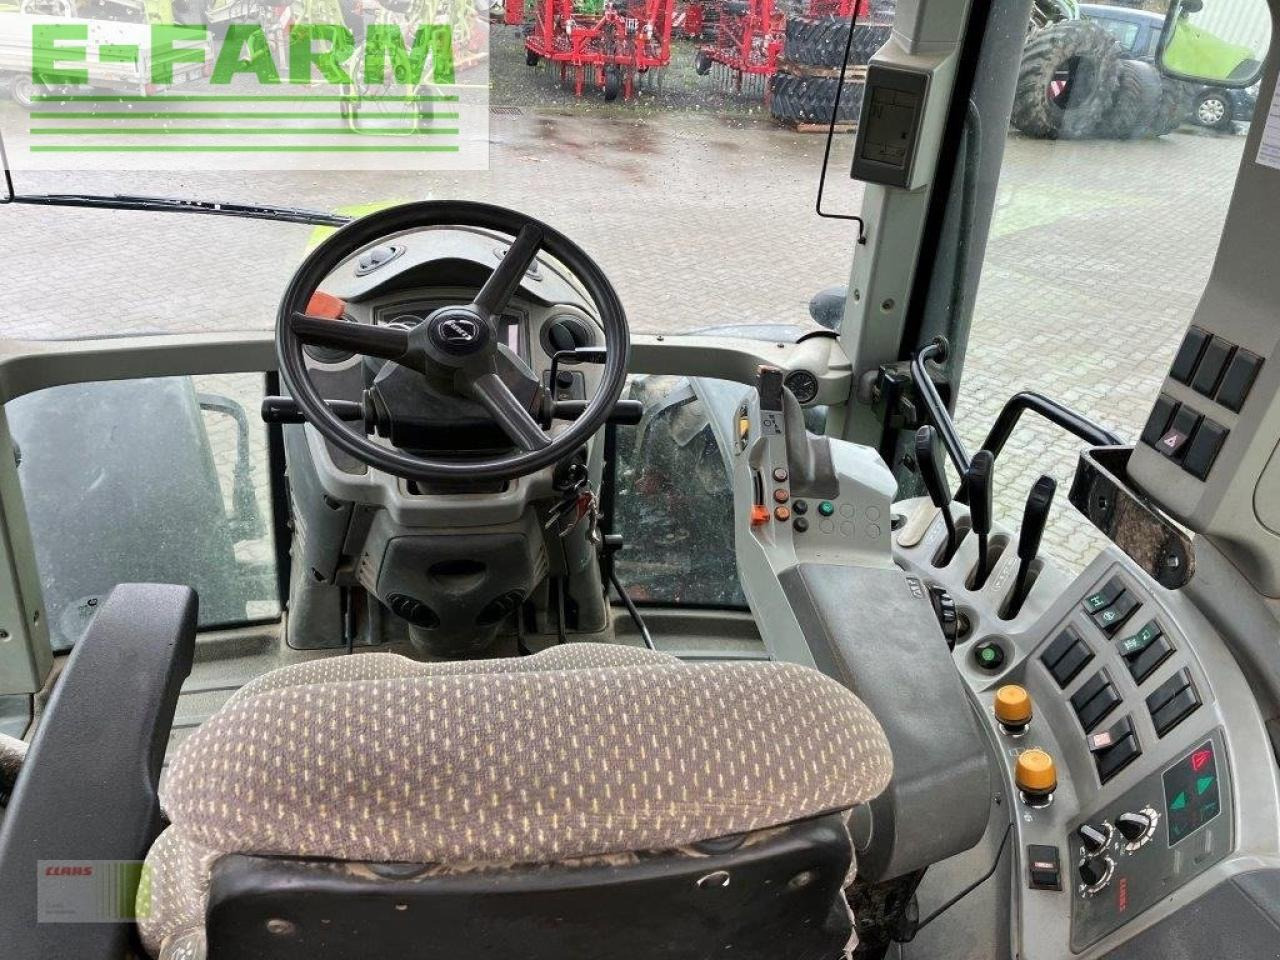 Tractor CLAAS arion 640 cis